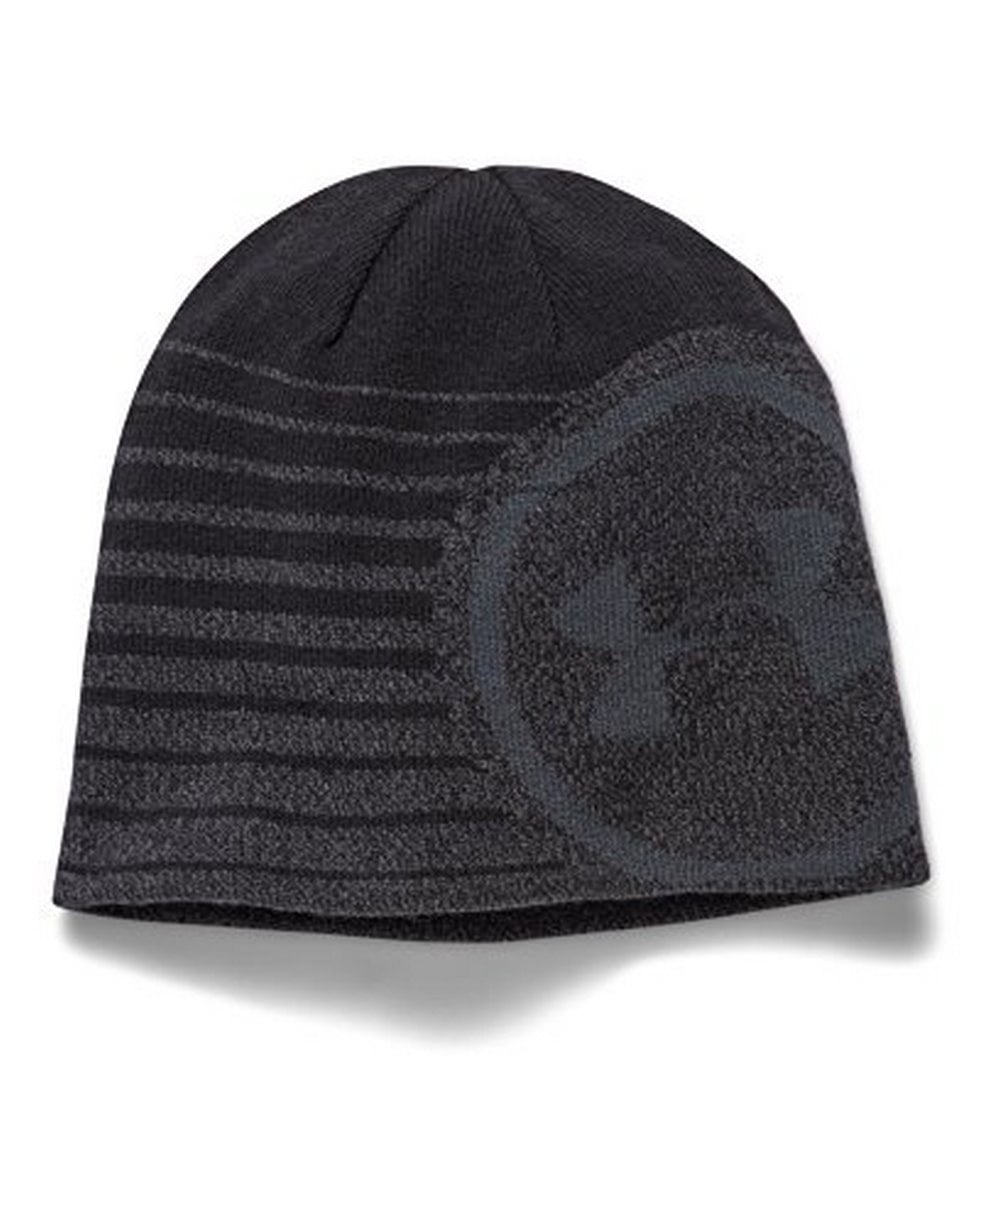 Under Armour Men's ColdGear Beanie Charcoal color with reflective writing 